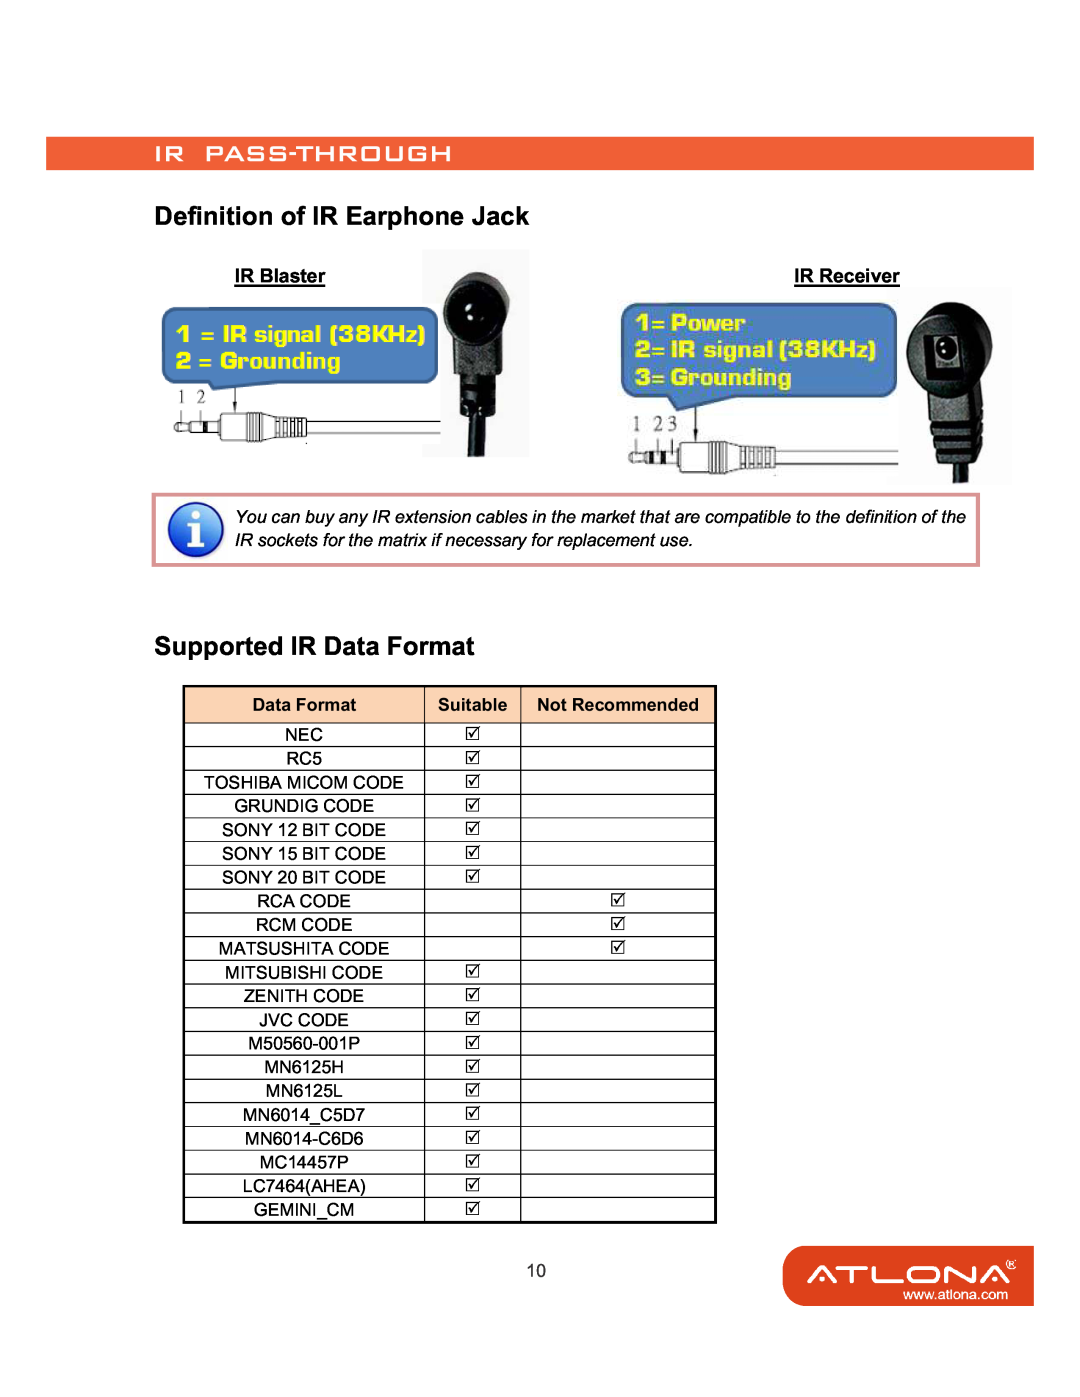 Atlona AT-HD88M-SR manual Definition of IR Earphone Jack, Supported IR Data Format, IR Blaster, IR Receiver, Suitable 